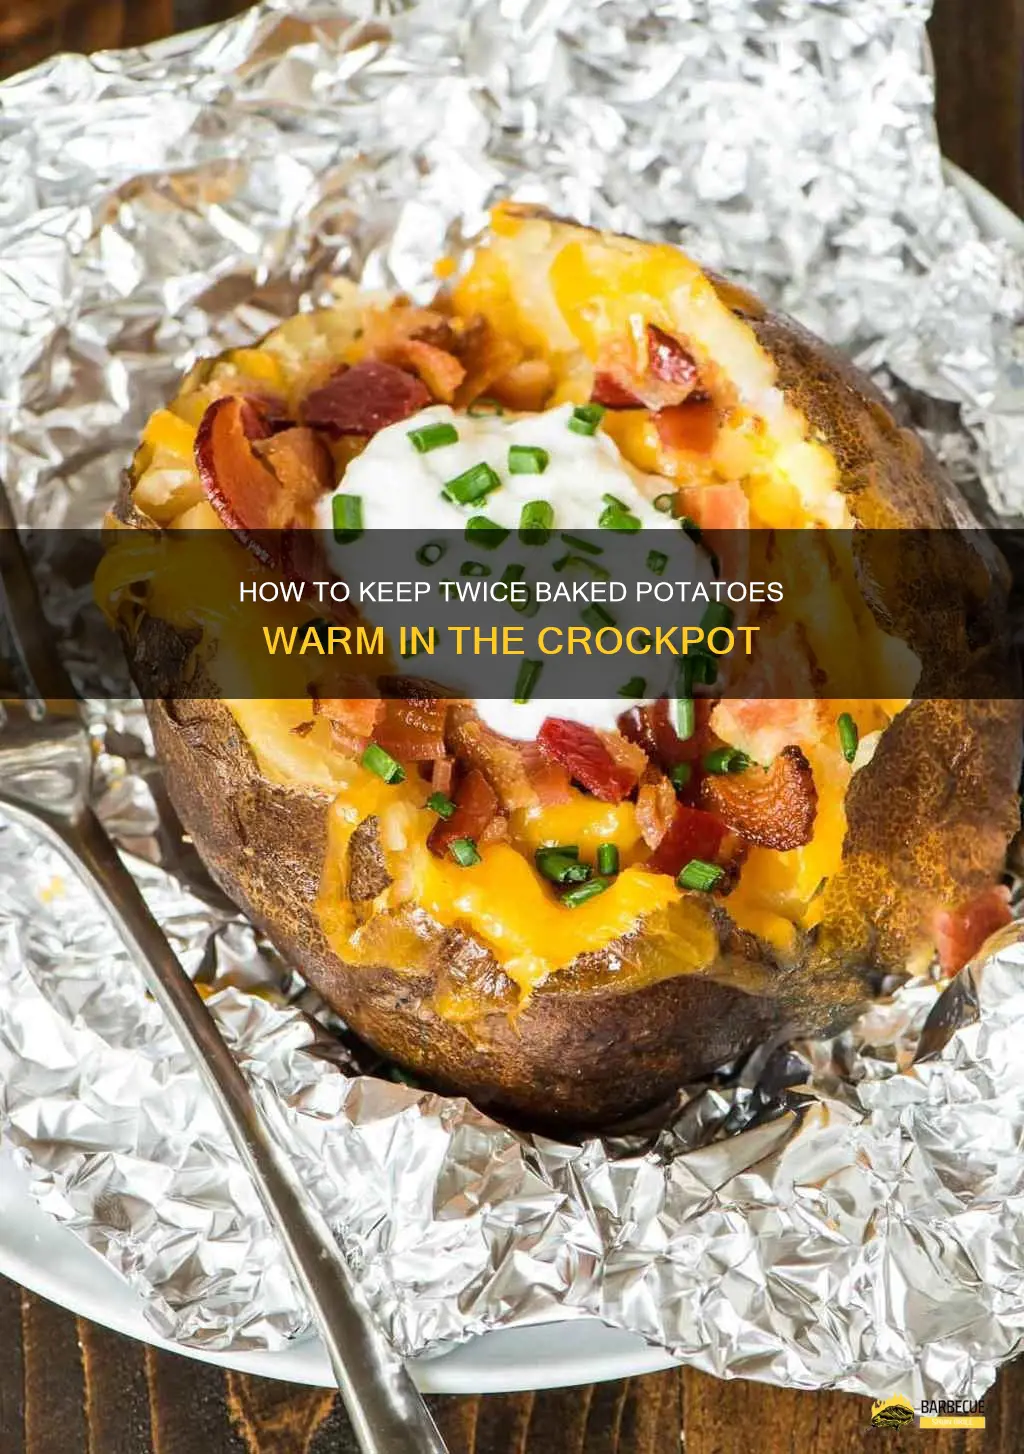 How To Keep Twice Baked Potatoes Warm In The Crockpot | ShunGrill